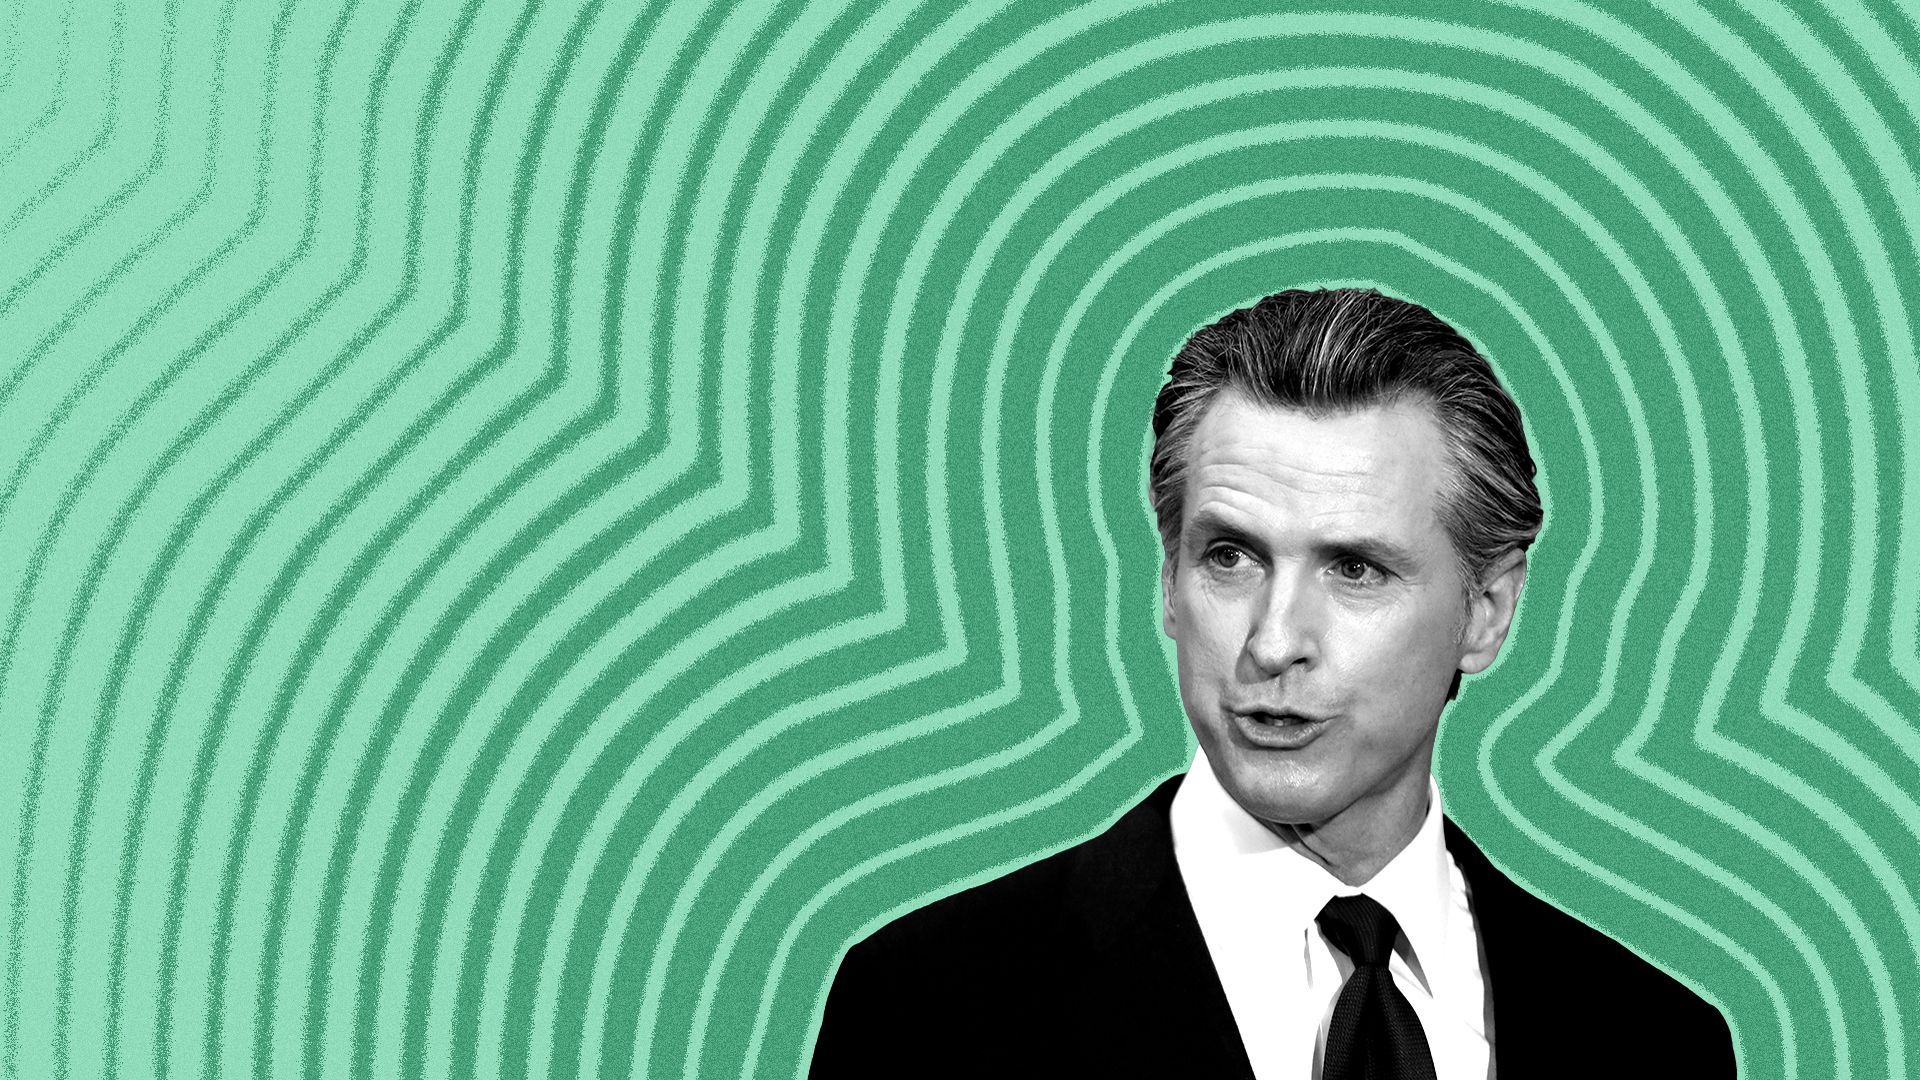 Photo illustration of California Governor Gavin Newsom with lines radiating from him.